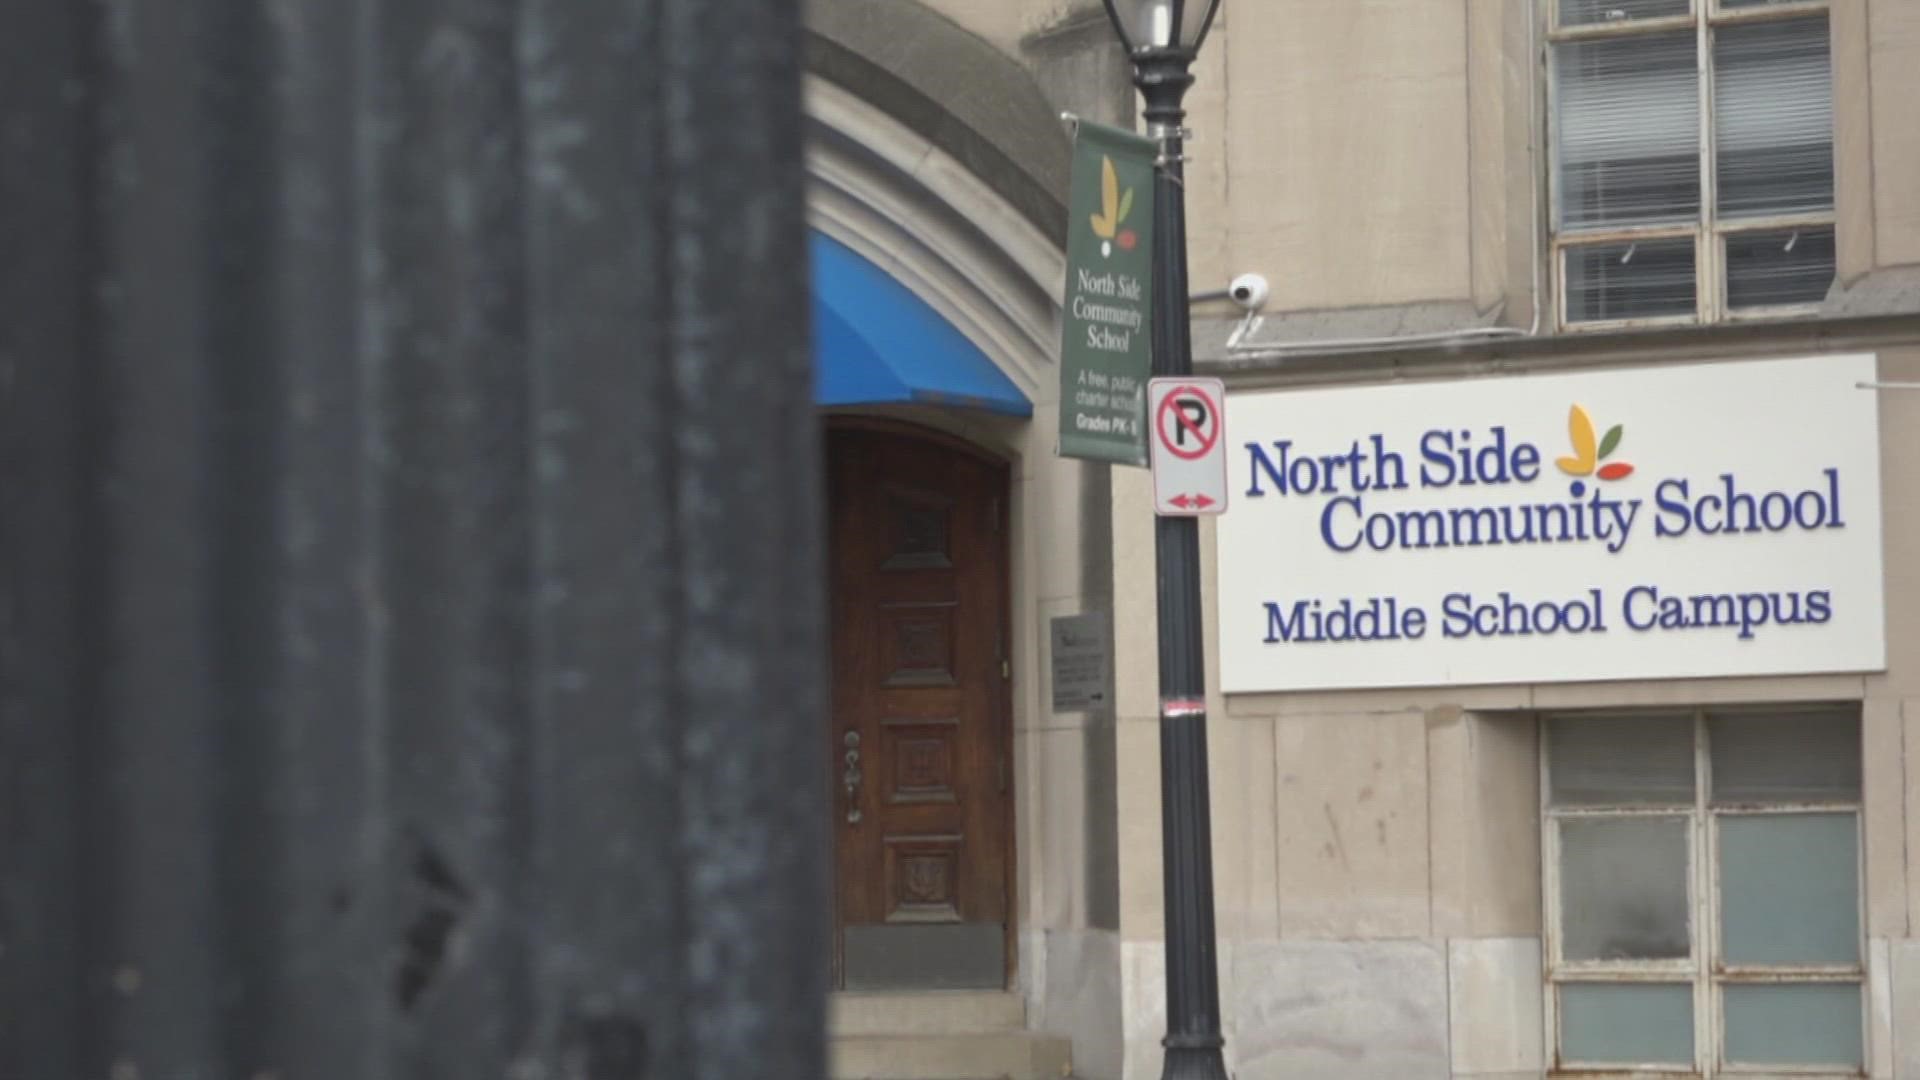 The incident occurred at the North Side Community School Thursday. Six students got sick, three went to the hospital.